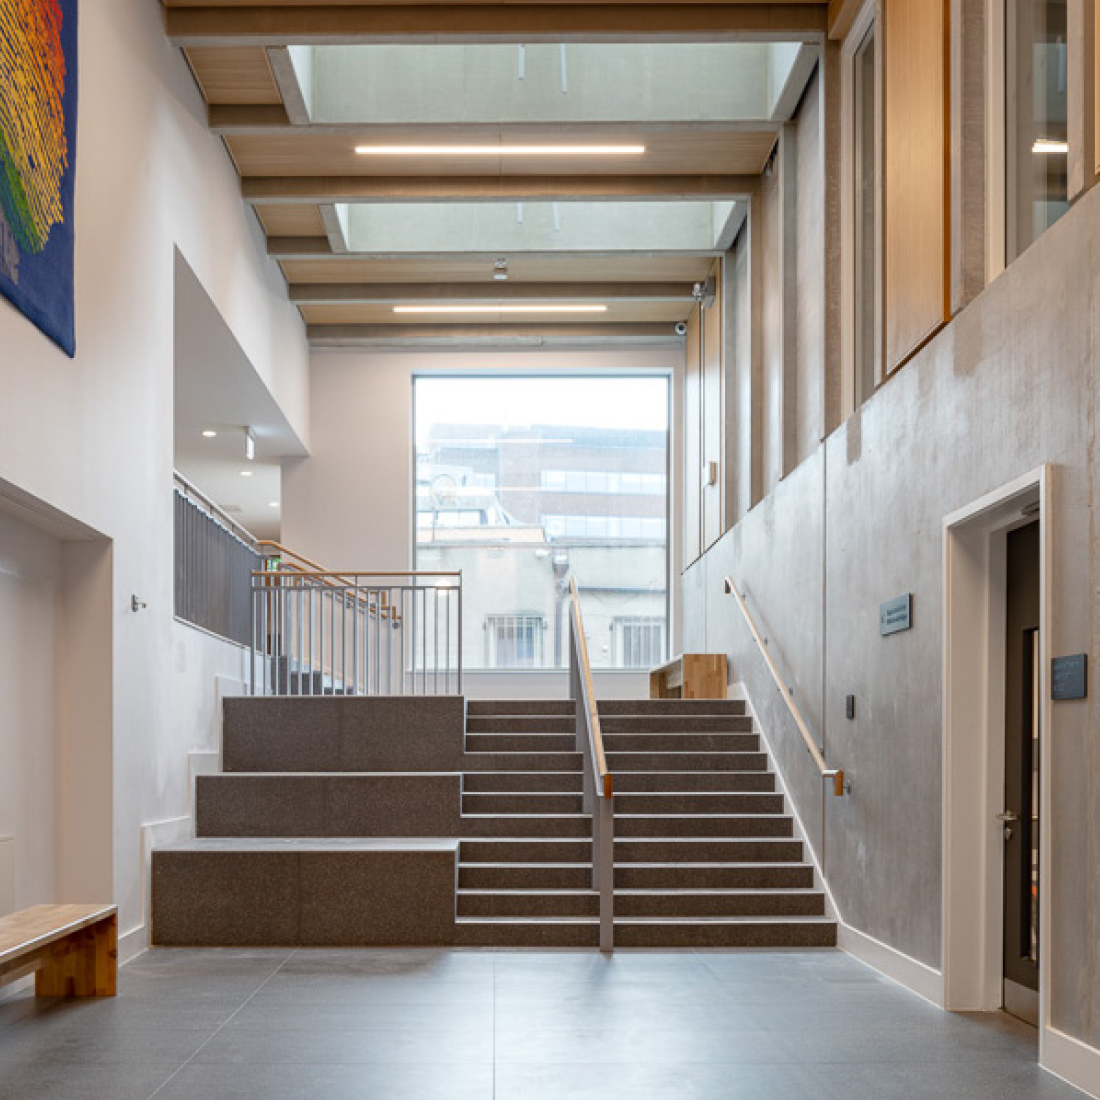 We are honoured that our project for the The Royal Irish Academy of Music (RIAM) has been nominated for Irish Building and Design Awards 'Building Project of the Year' Award. Please vote today by visiting bit.ly/3T4jJyX #MusicAcademy #Architecture #TeamTODD #IBDAAwards